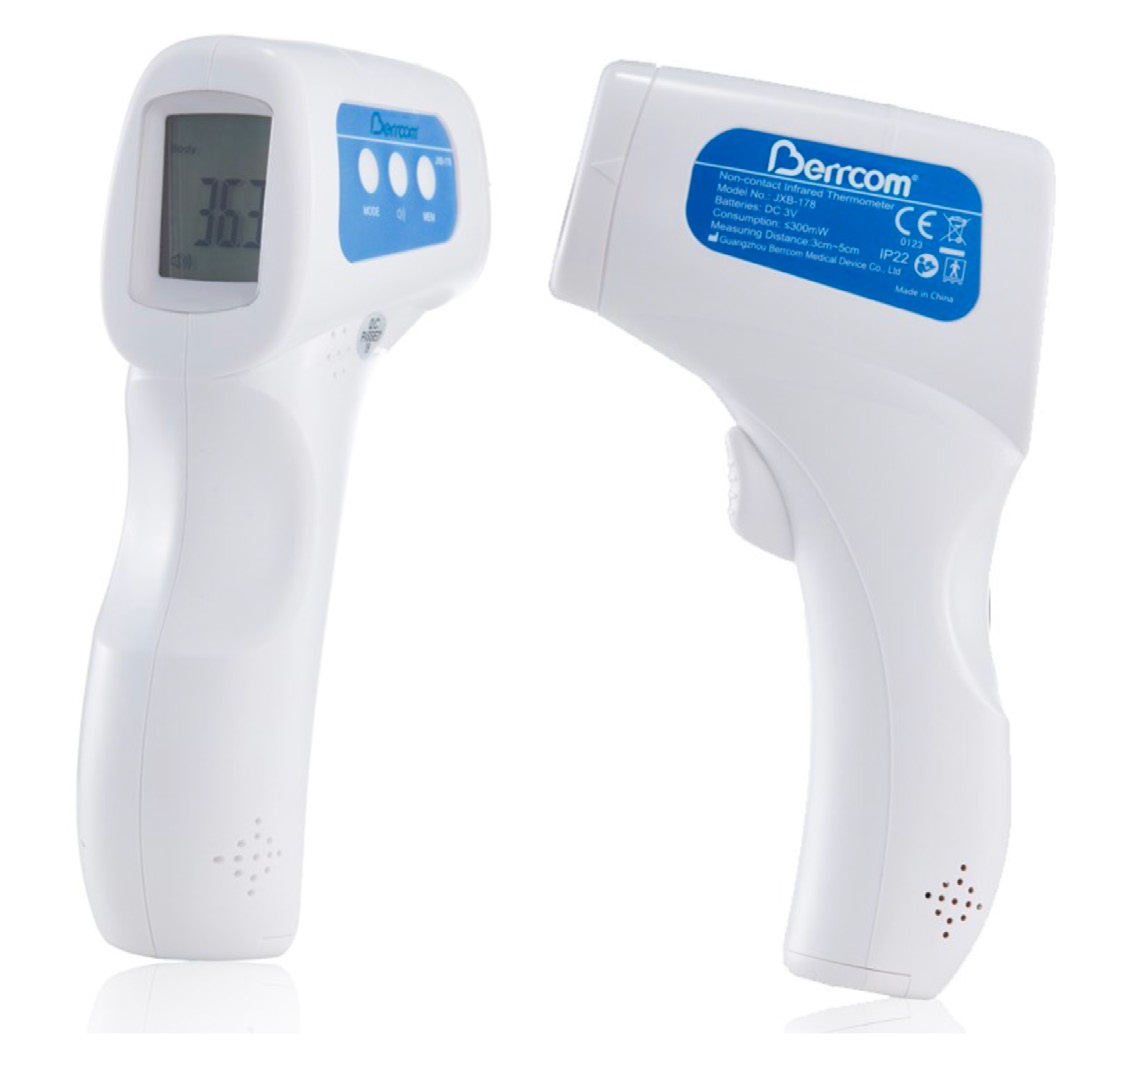 Berrcom Infrared Touchless Thermometer image 0